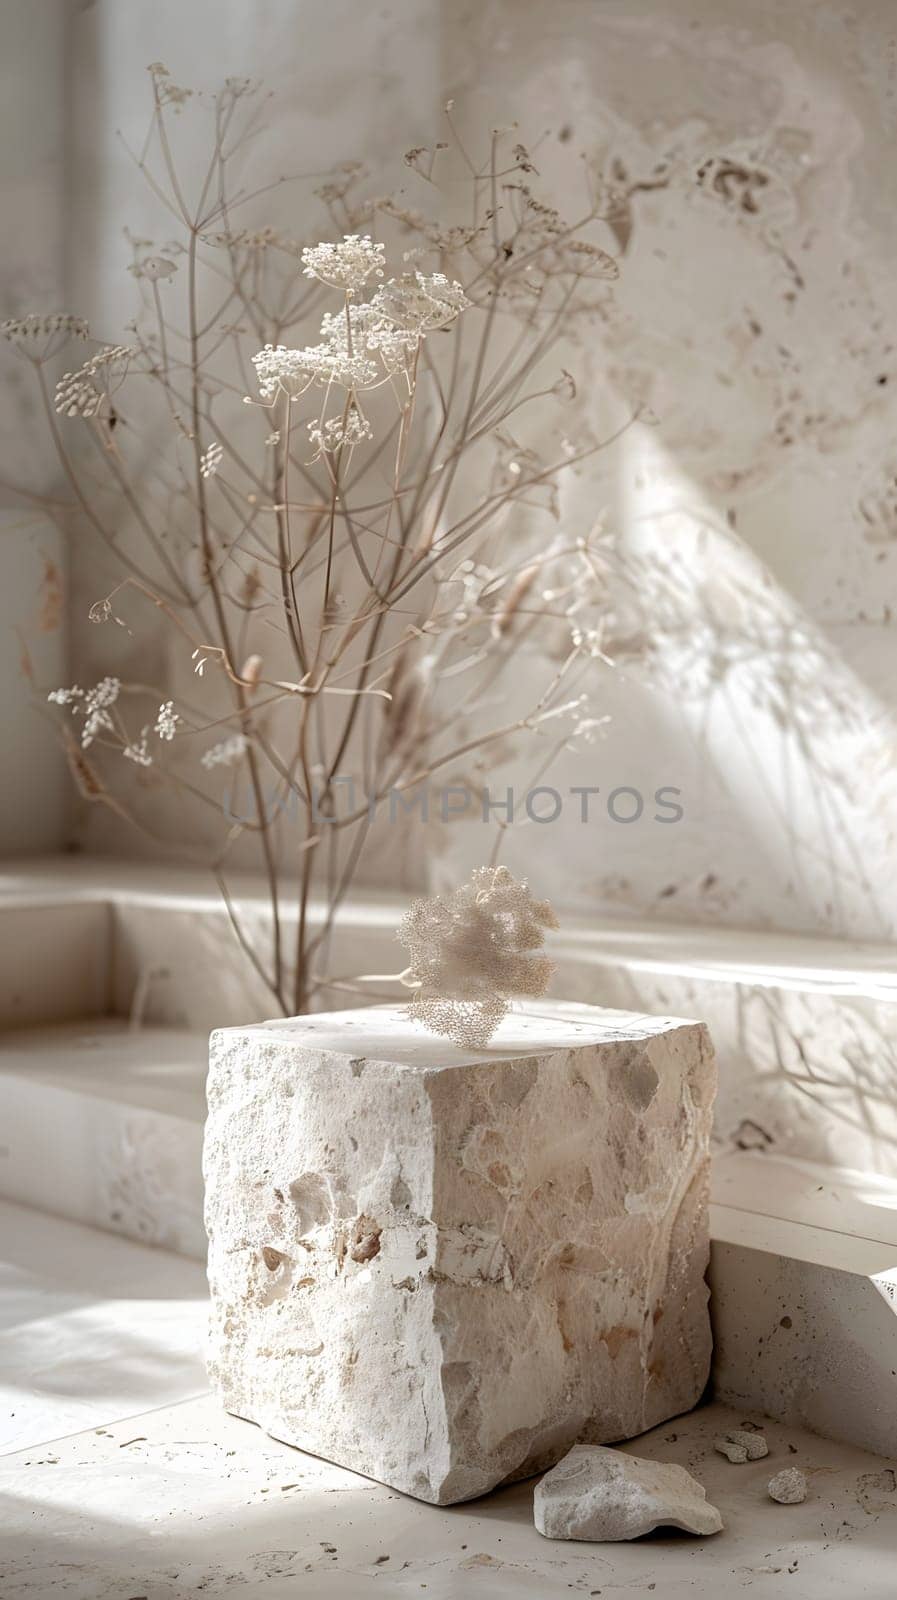 A flowerpot made of wood holds a beautiful twig plant on the concrete flooring of the room. A glass vase of dried flowers sits on a stone block near the window, under the high ceiling